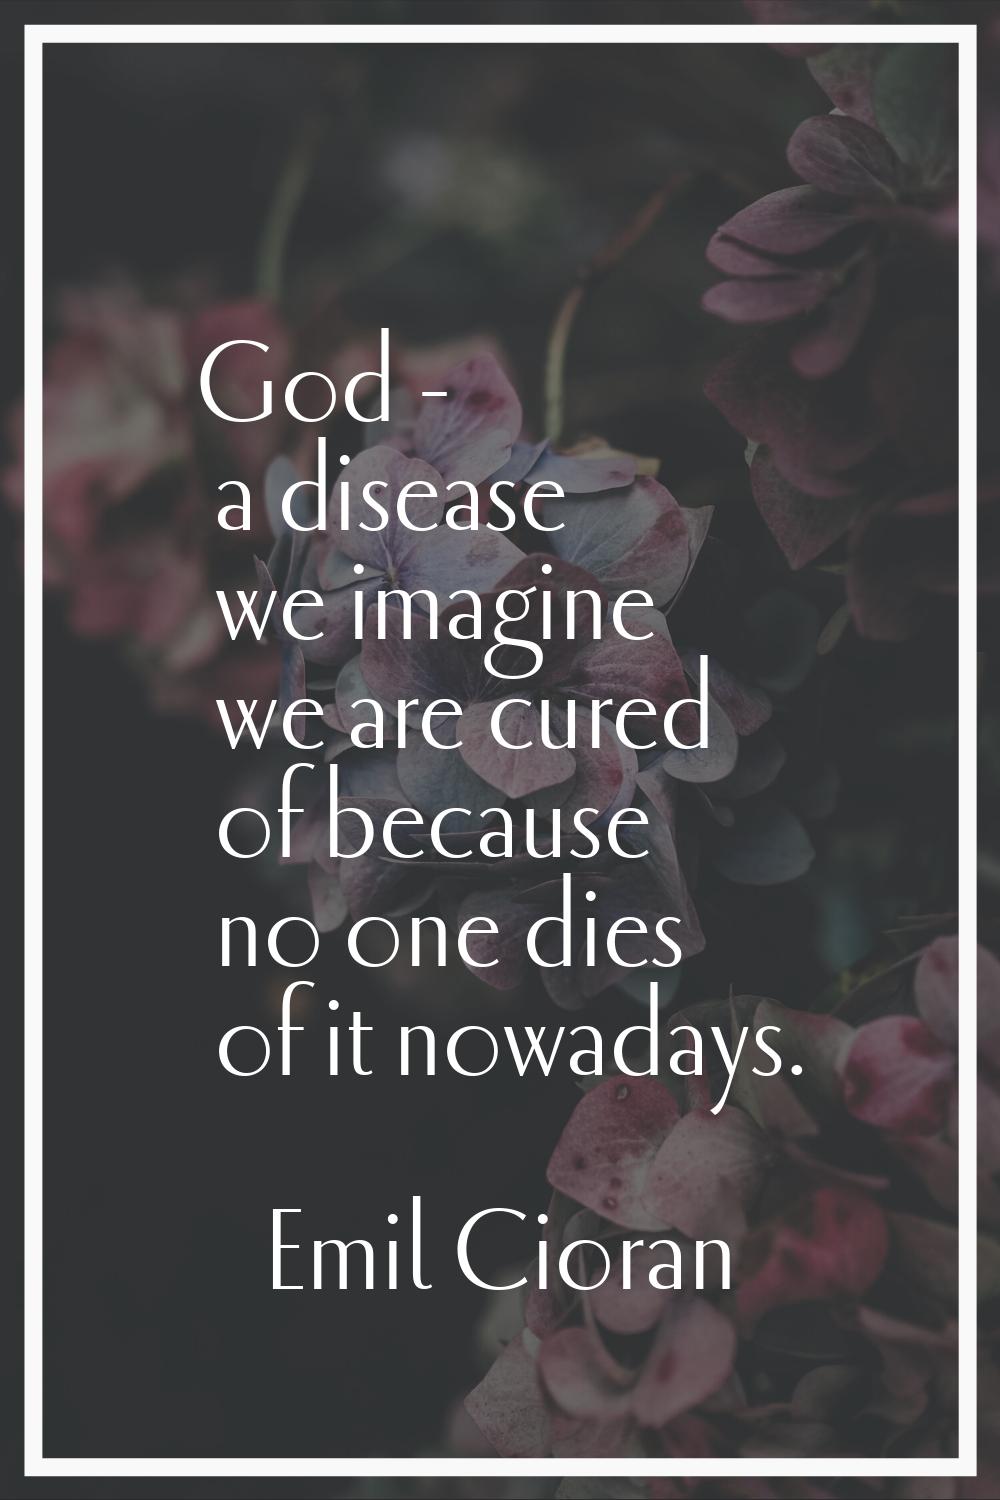 God - a disease we imagine we are cured of because no one dies of it nowadays.